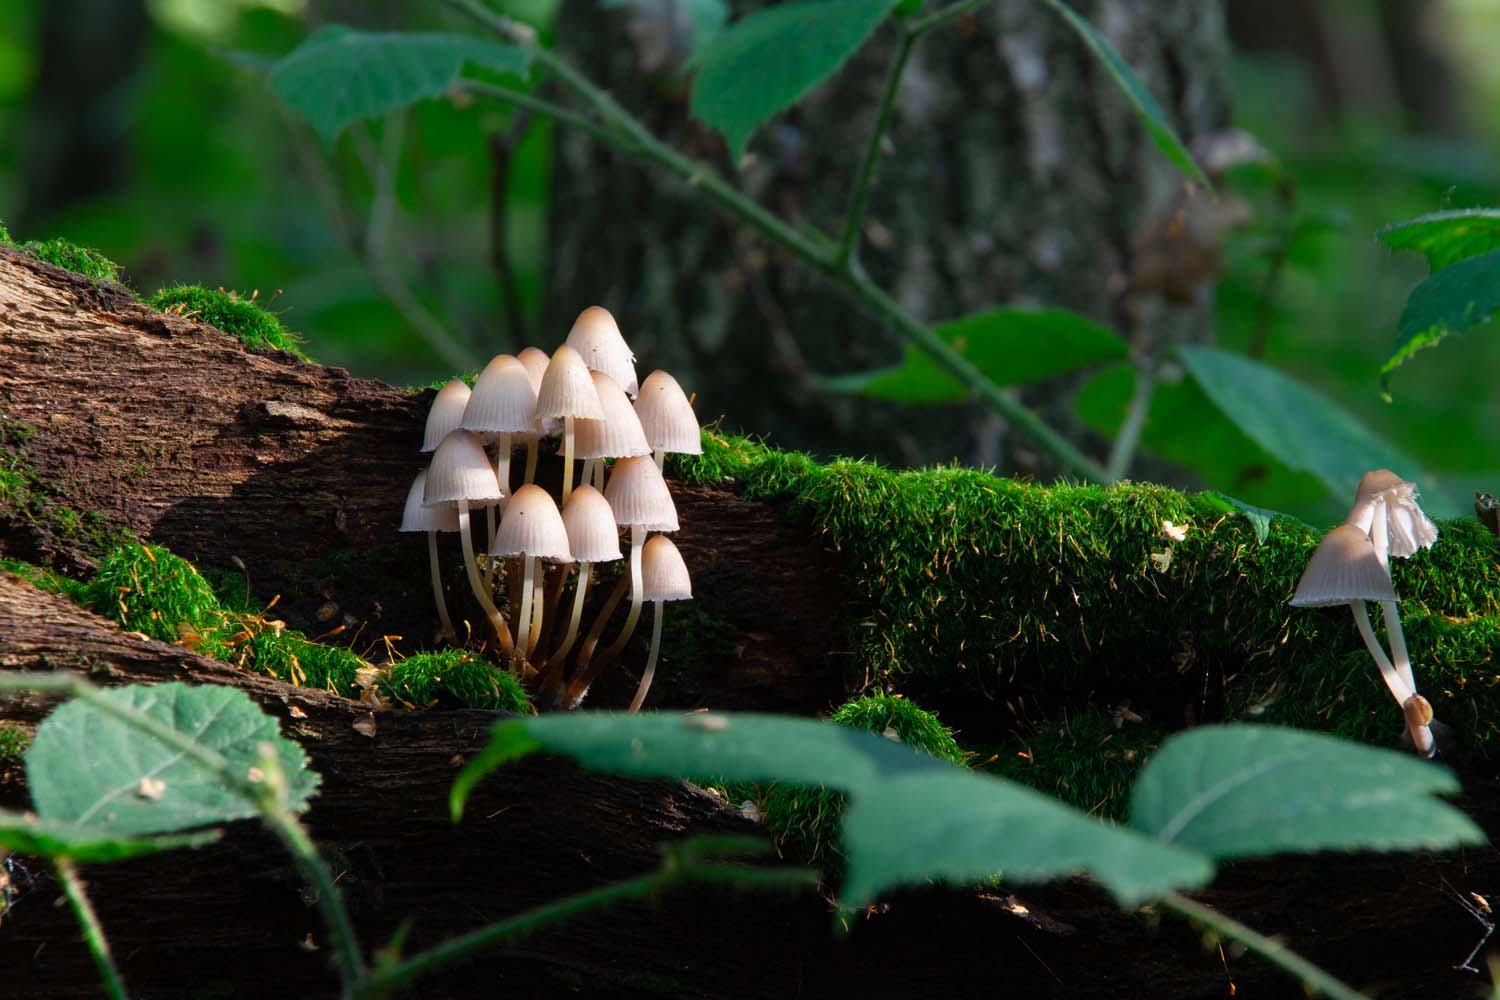 A group of small mushrooms growing on a moss-covered log